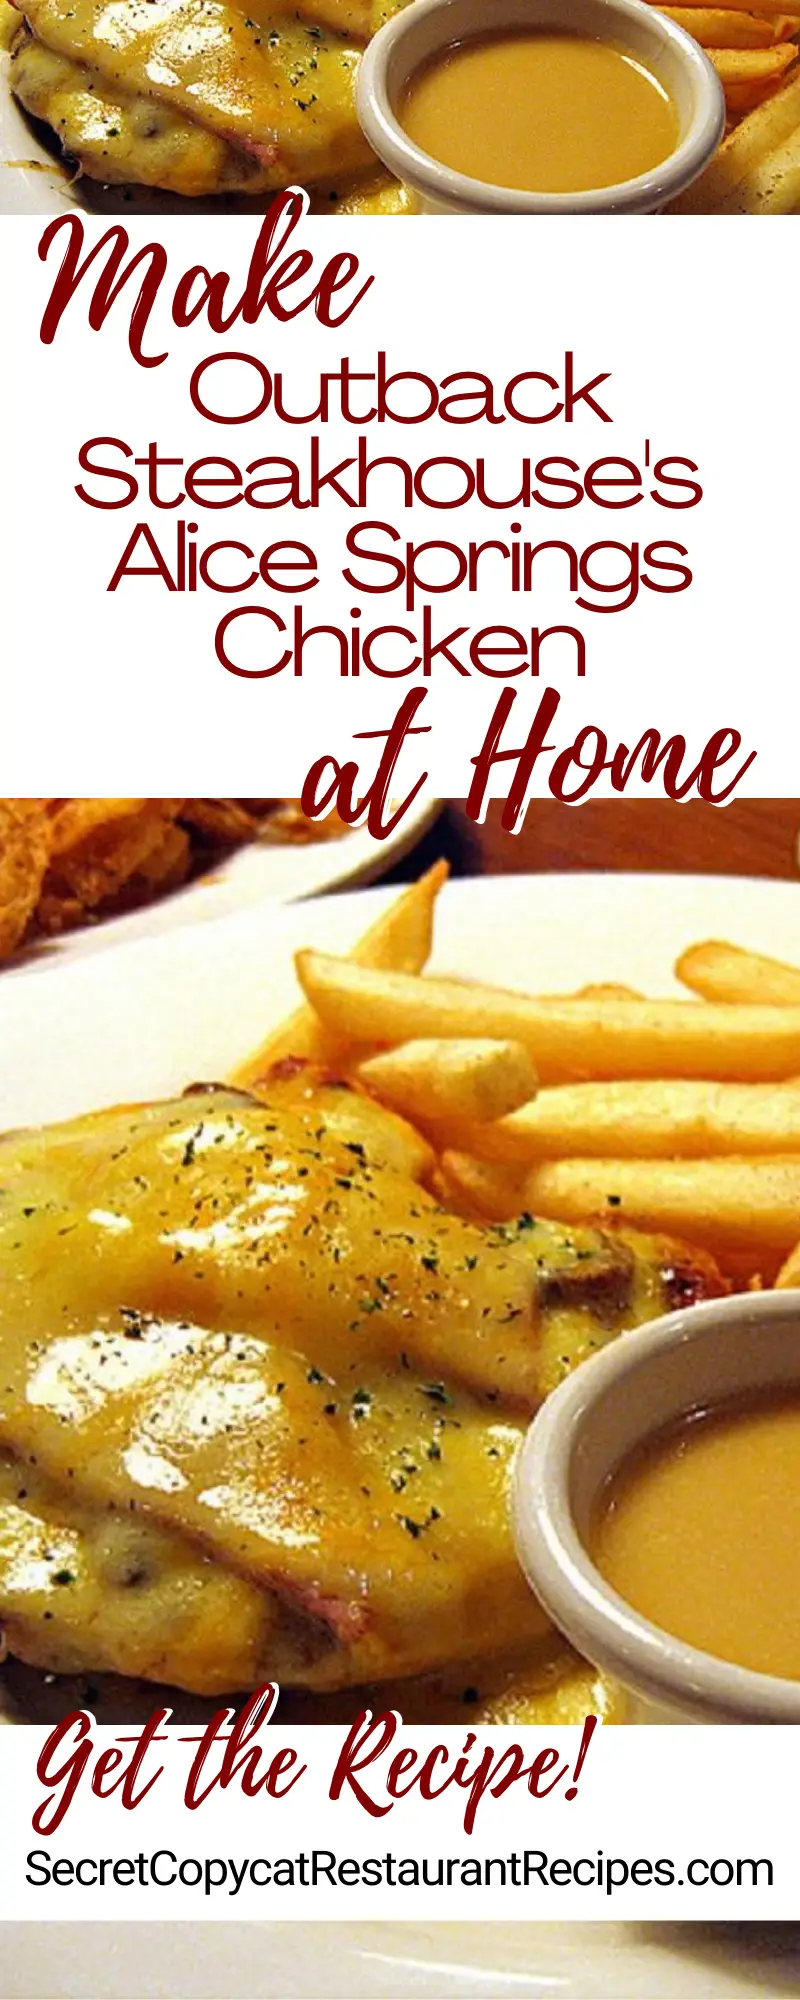 Outback Steakhouse Alice Springs Chicken Recipe